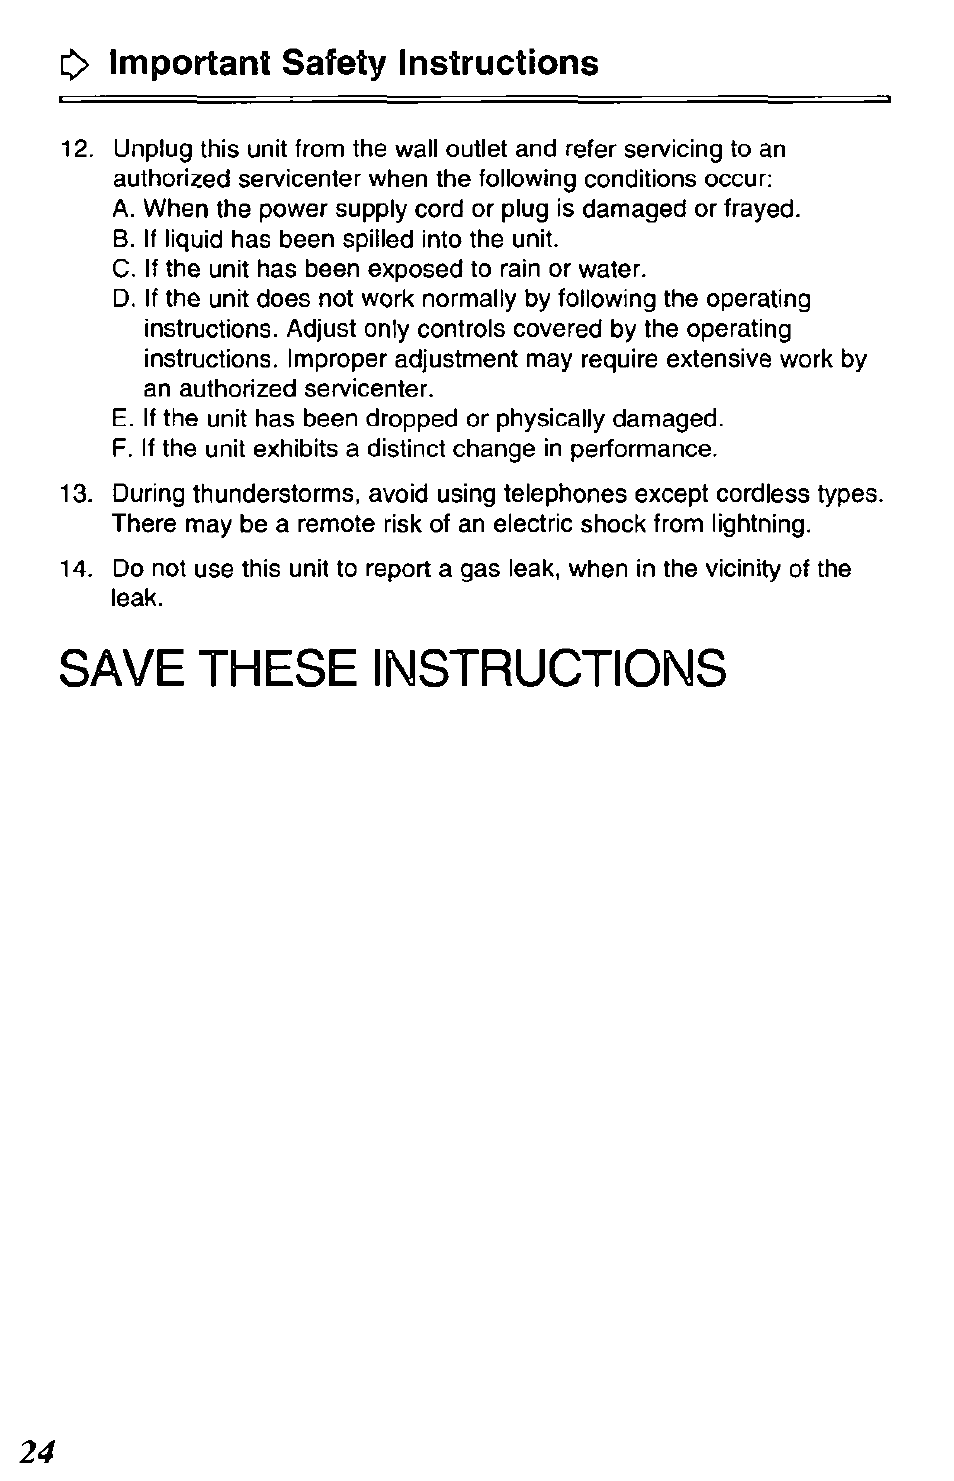 Important safety instructions, Save these instructions | Panasonic DATA LINK KX-TCL100-B User Manual | Page 24 / 32